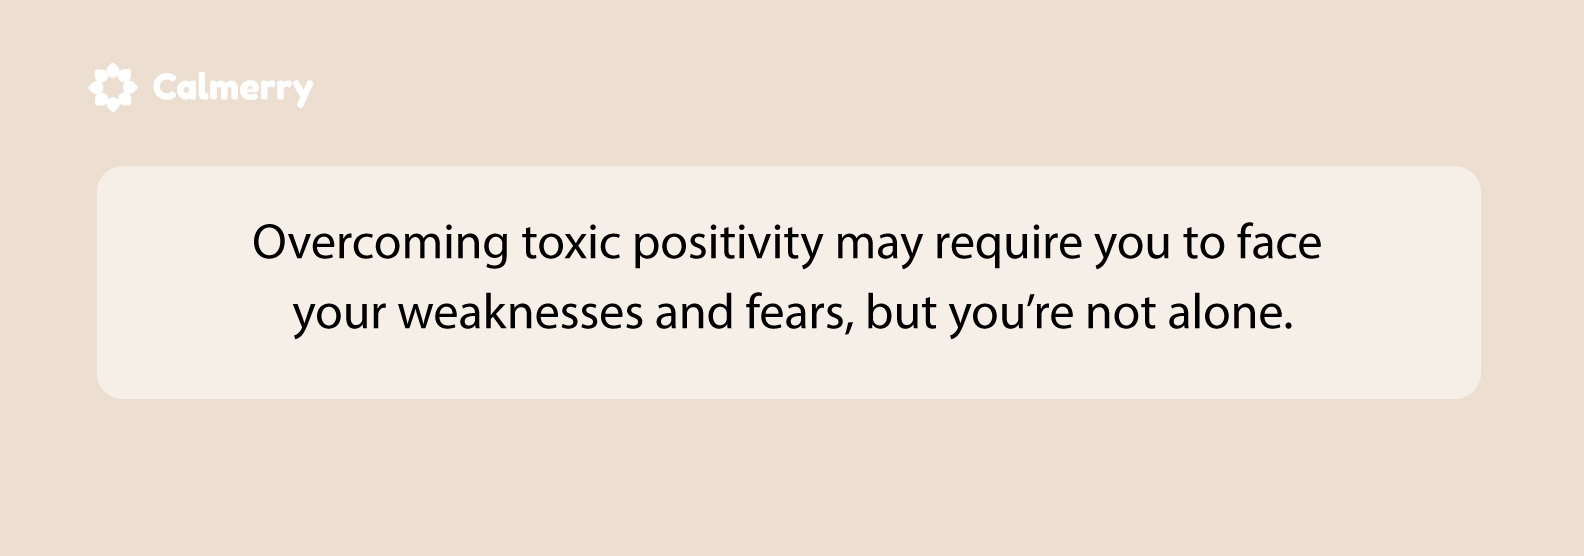 To overcome toxic positivity, you may need to face your fears. You're not alone